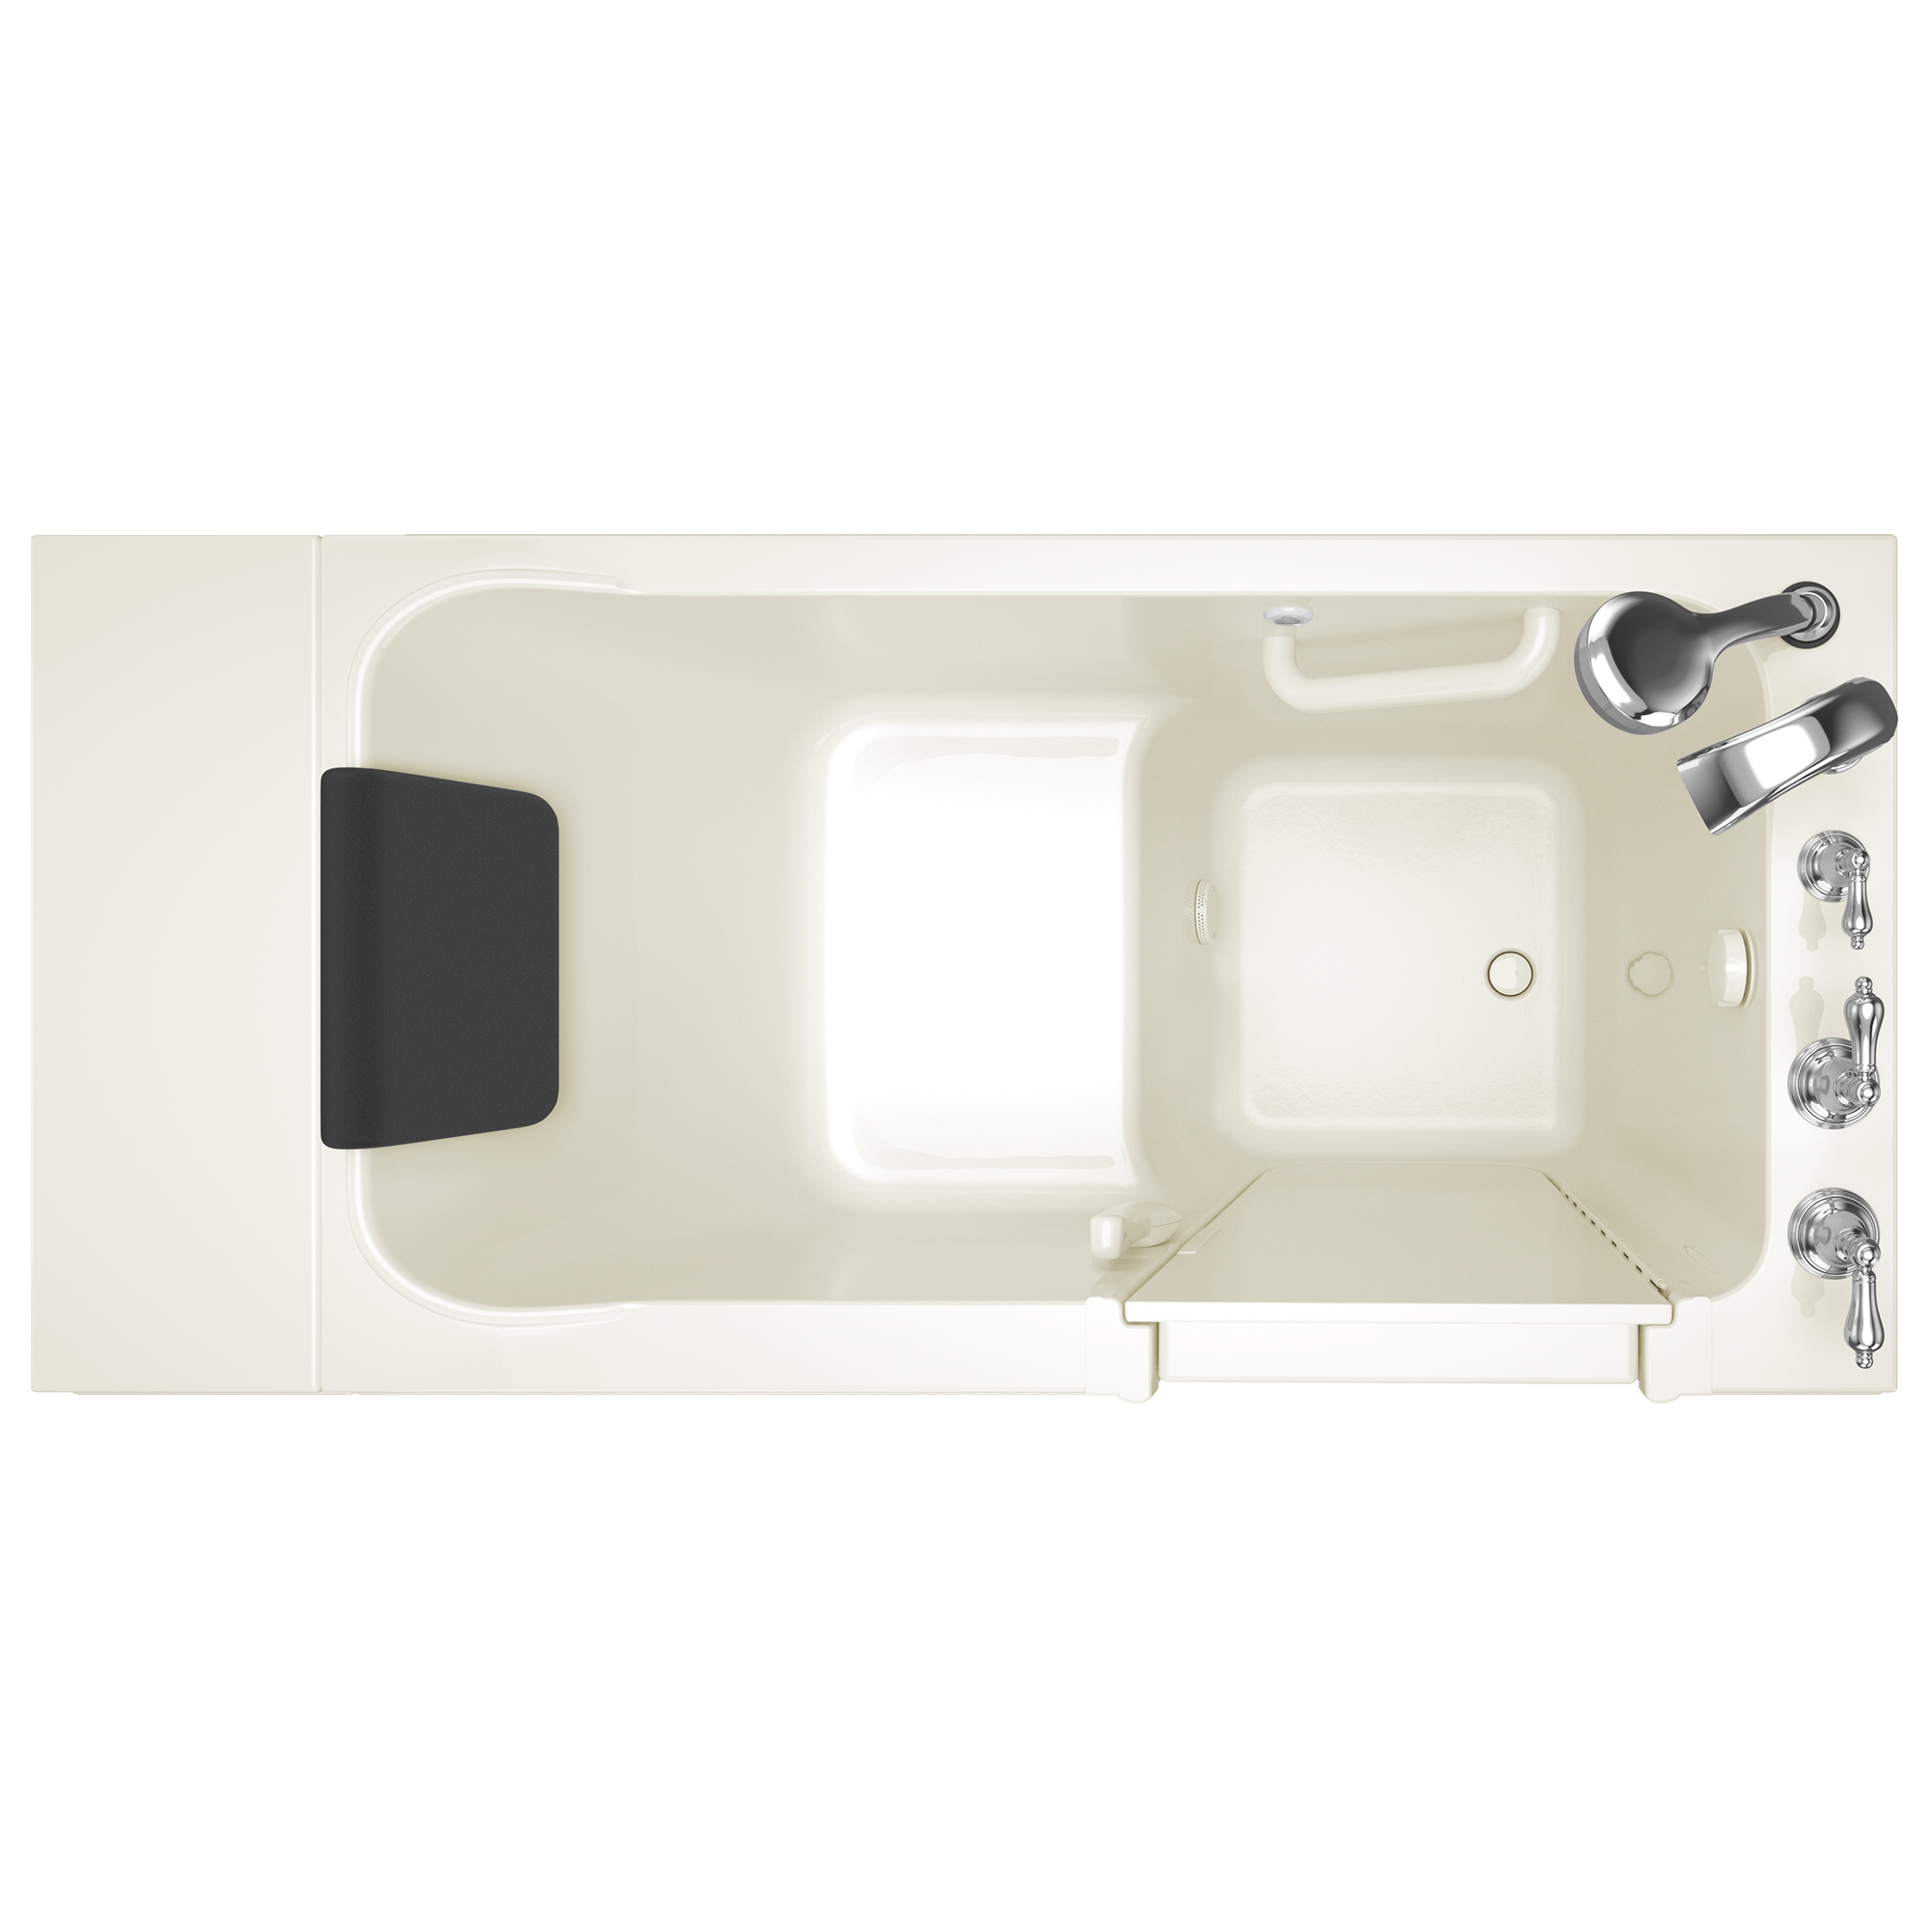 Acrylic Luxury Series 28 x 48-Inch Walk-in Tub With Soaker System - Right-Hand Drain With Faucet